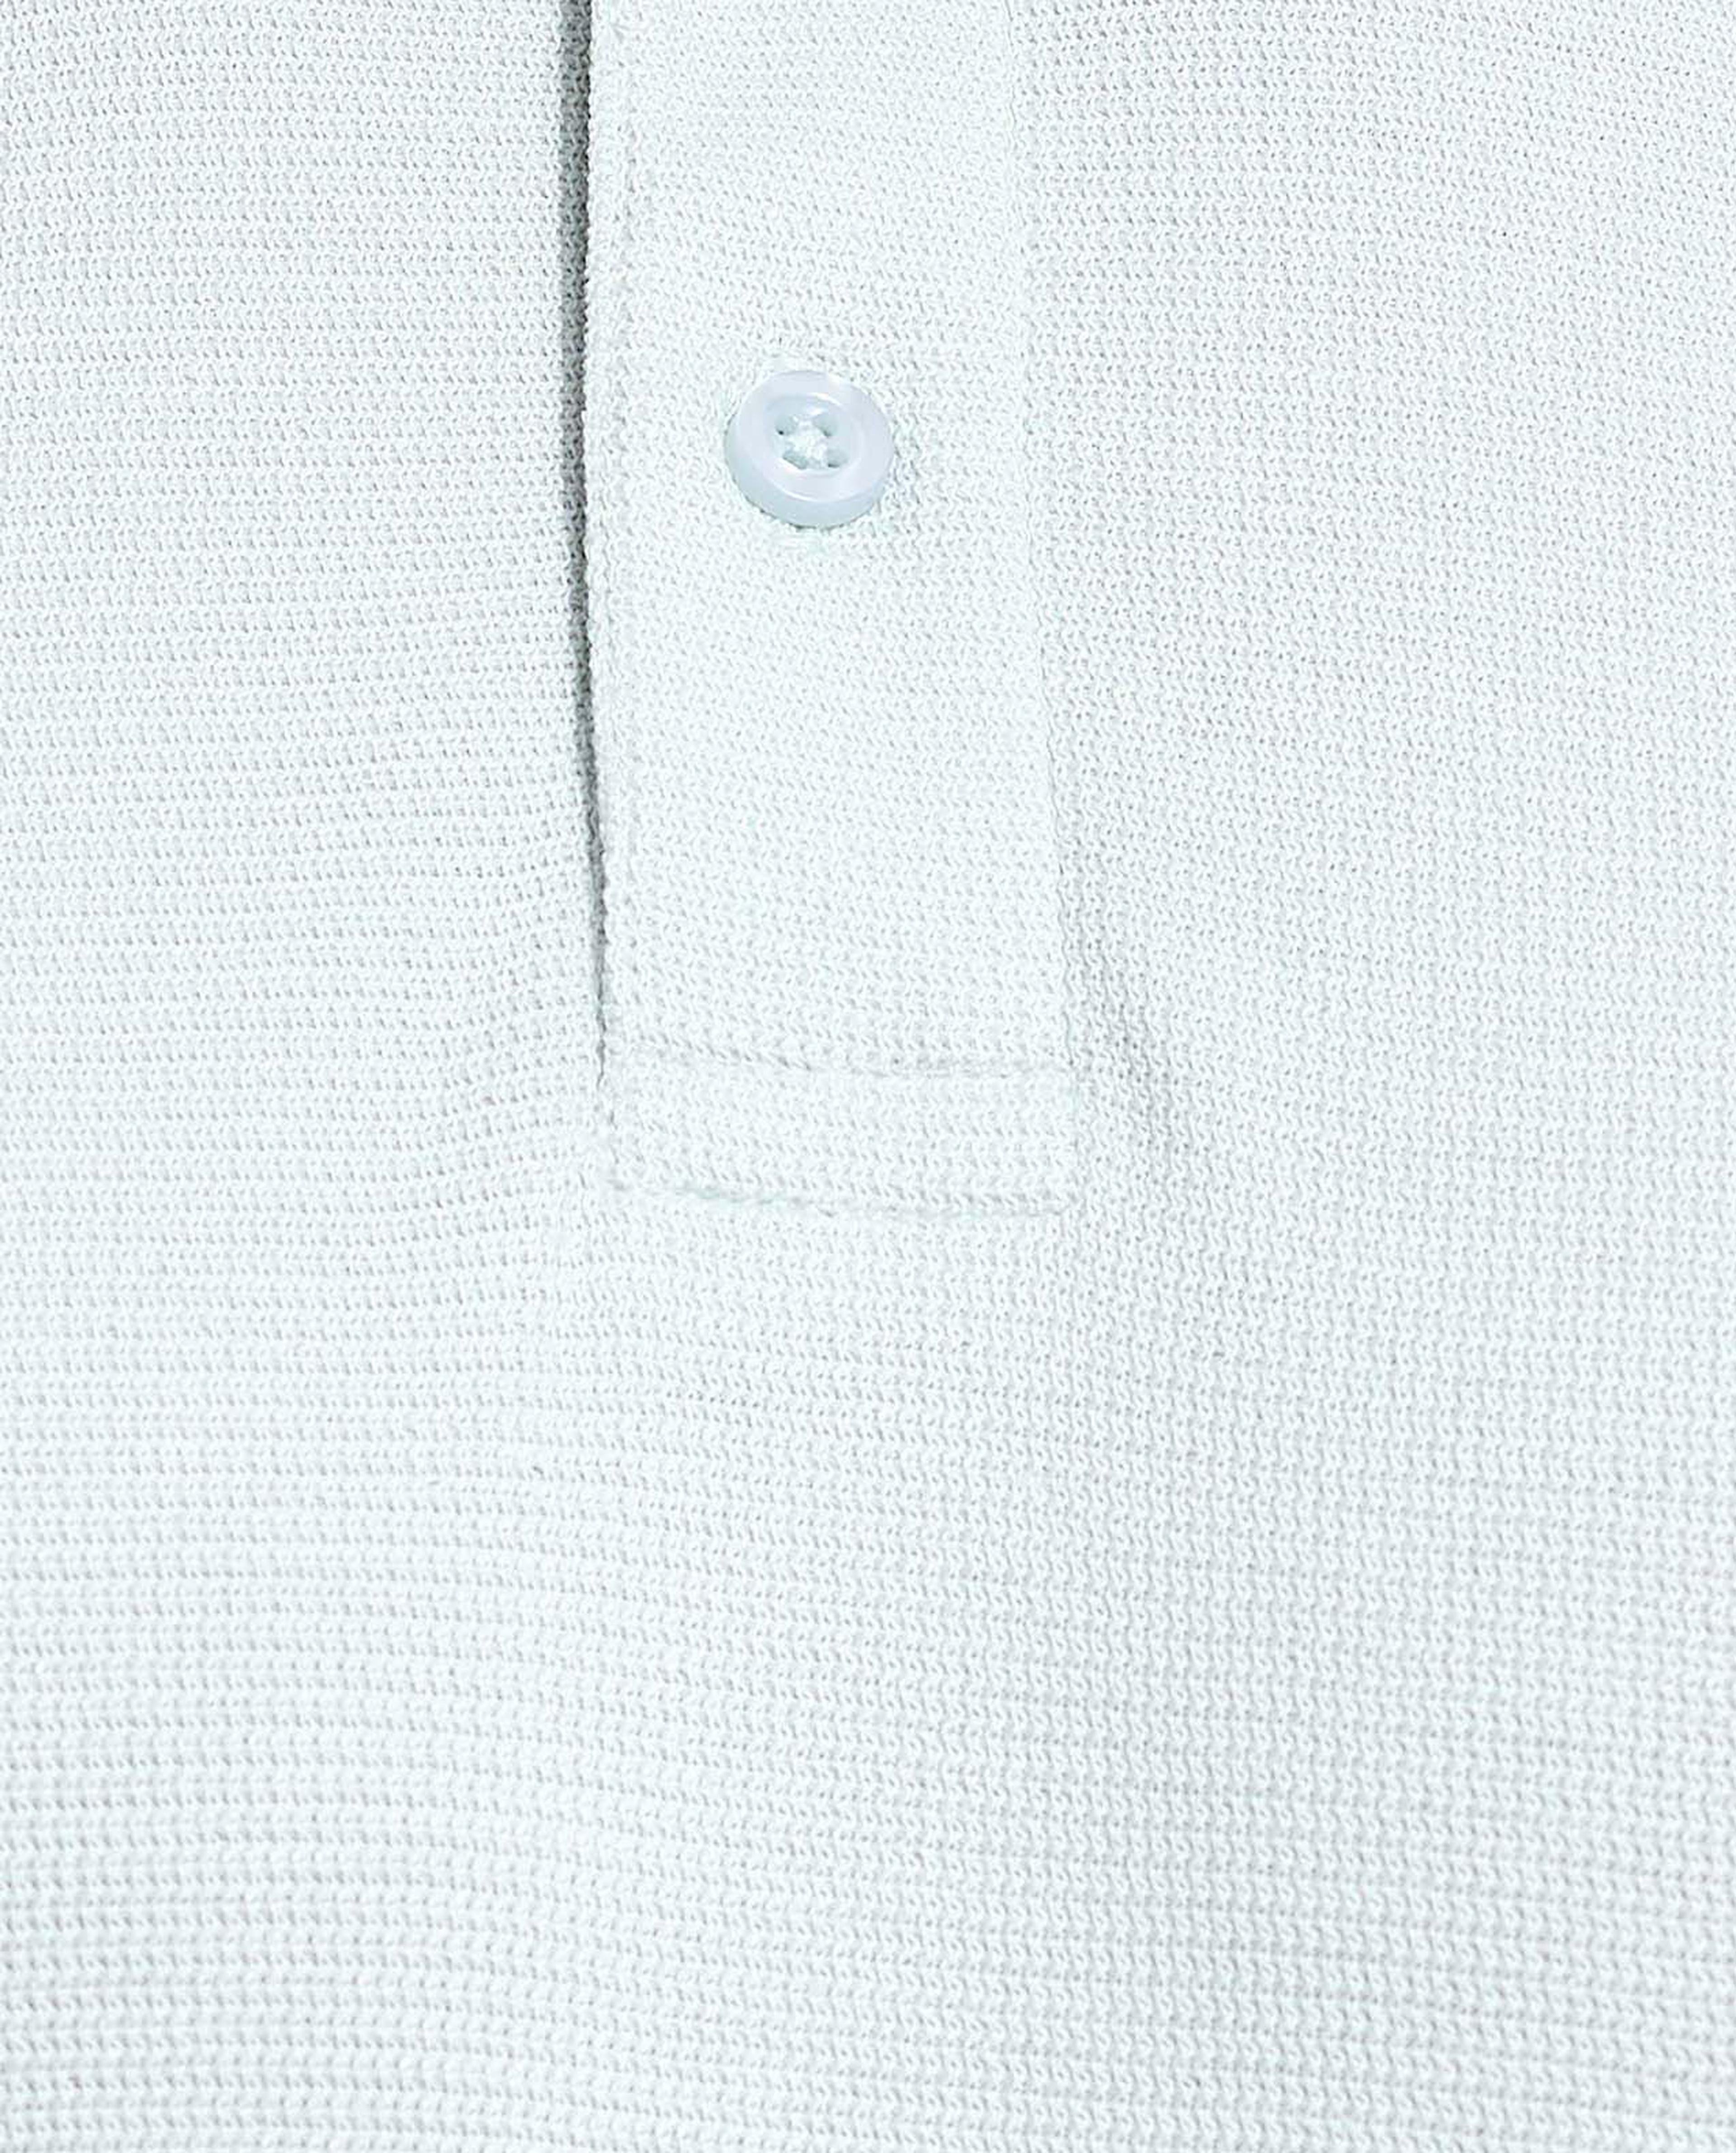 Textured Polo T-Shirt with Short Sleeves